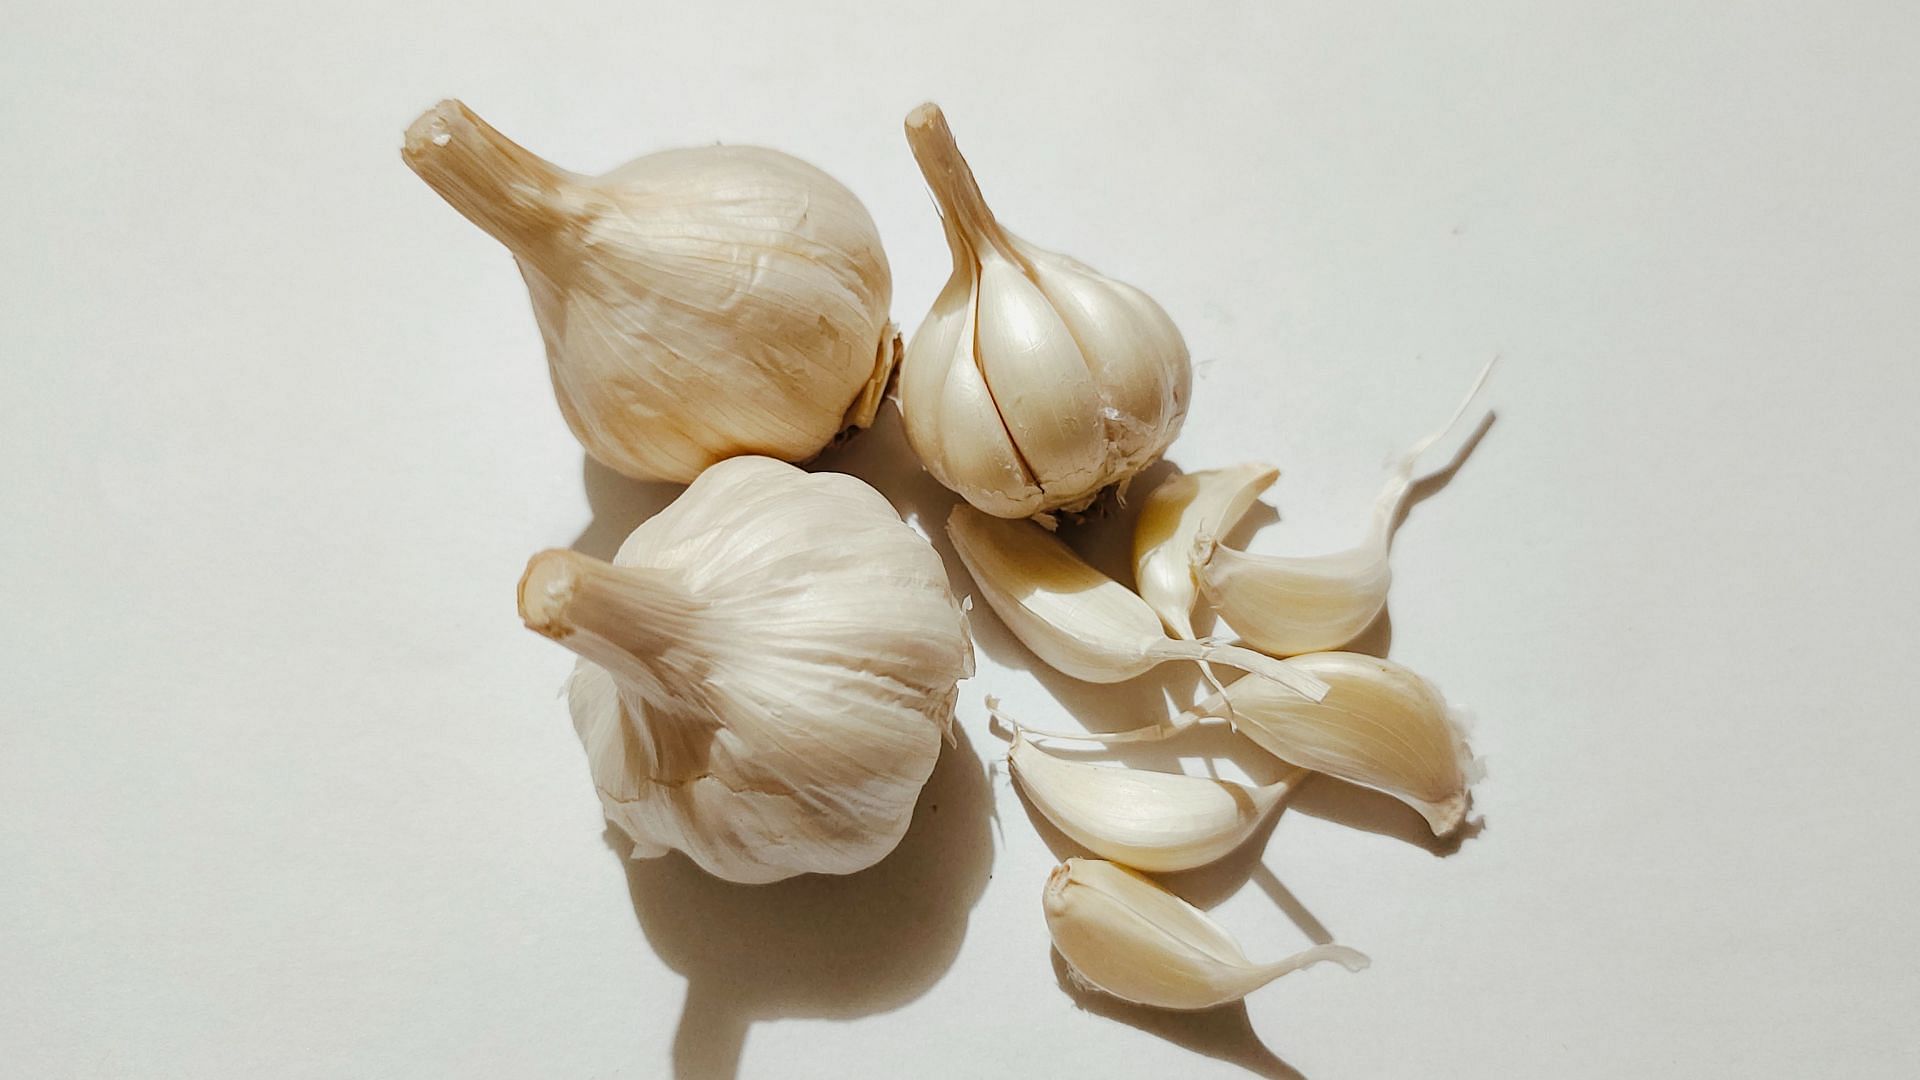 Garlic is a potent substance with a long list of possible health benefits. (Image by Surya Prakash)